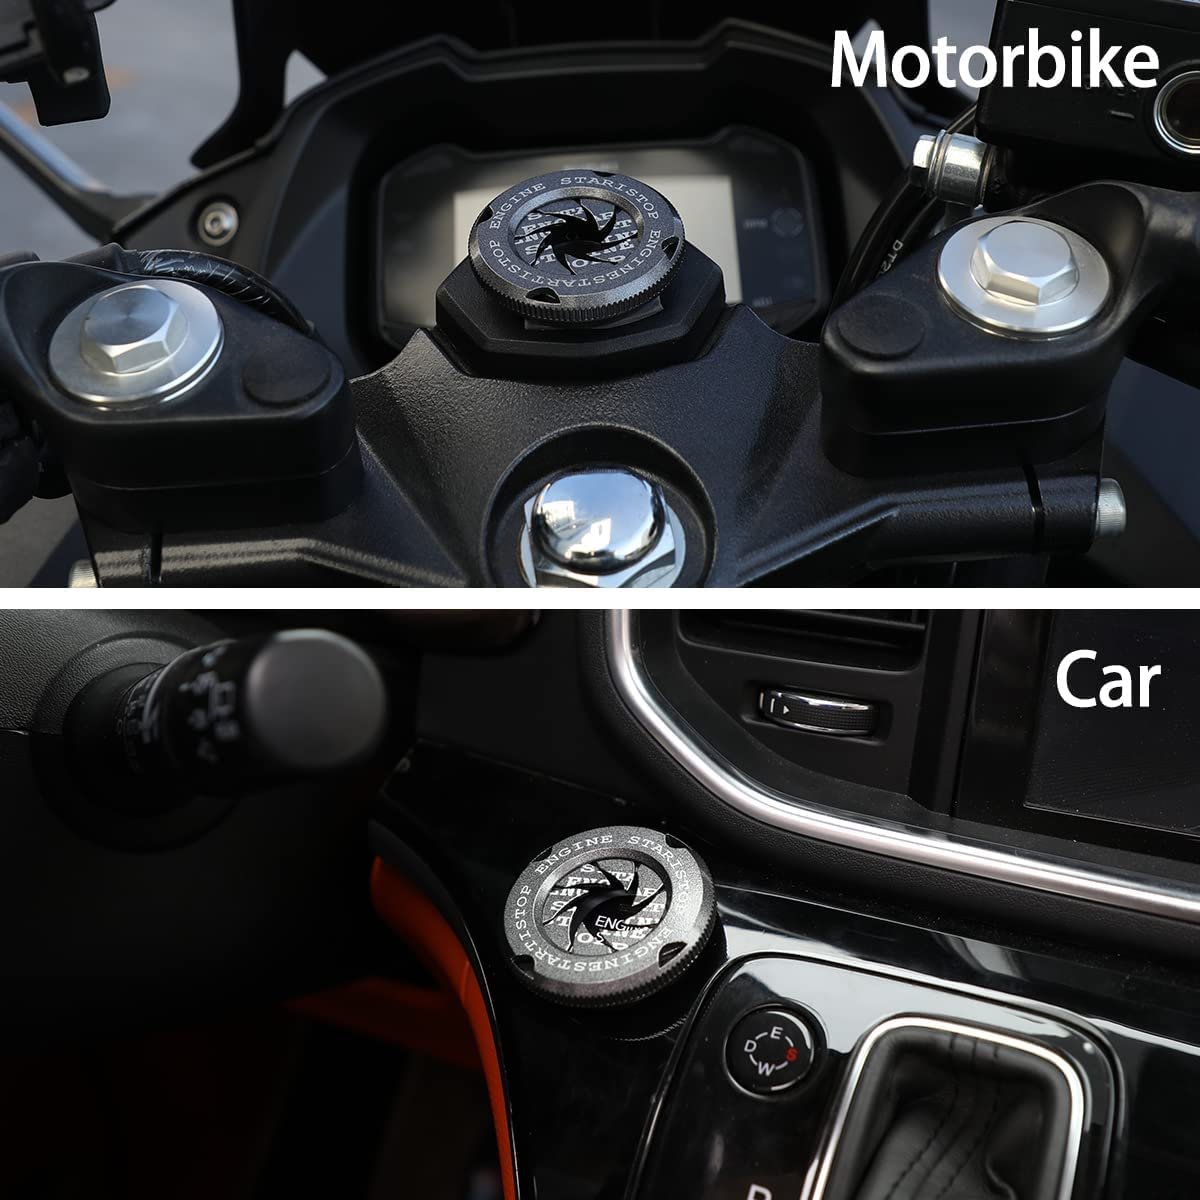 Bike CAR Rotary Engine Start Stop Switch Lambo Style Button Cover Decorative Auto Accessories Push Button Sticky Cover Car Interior Image 